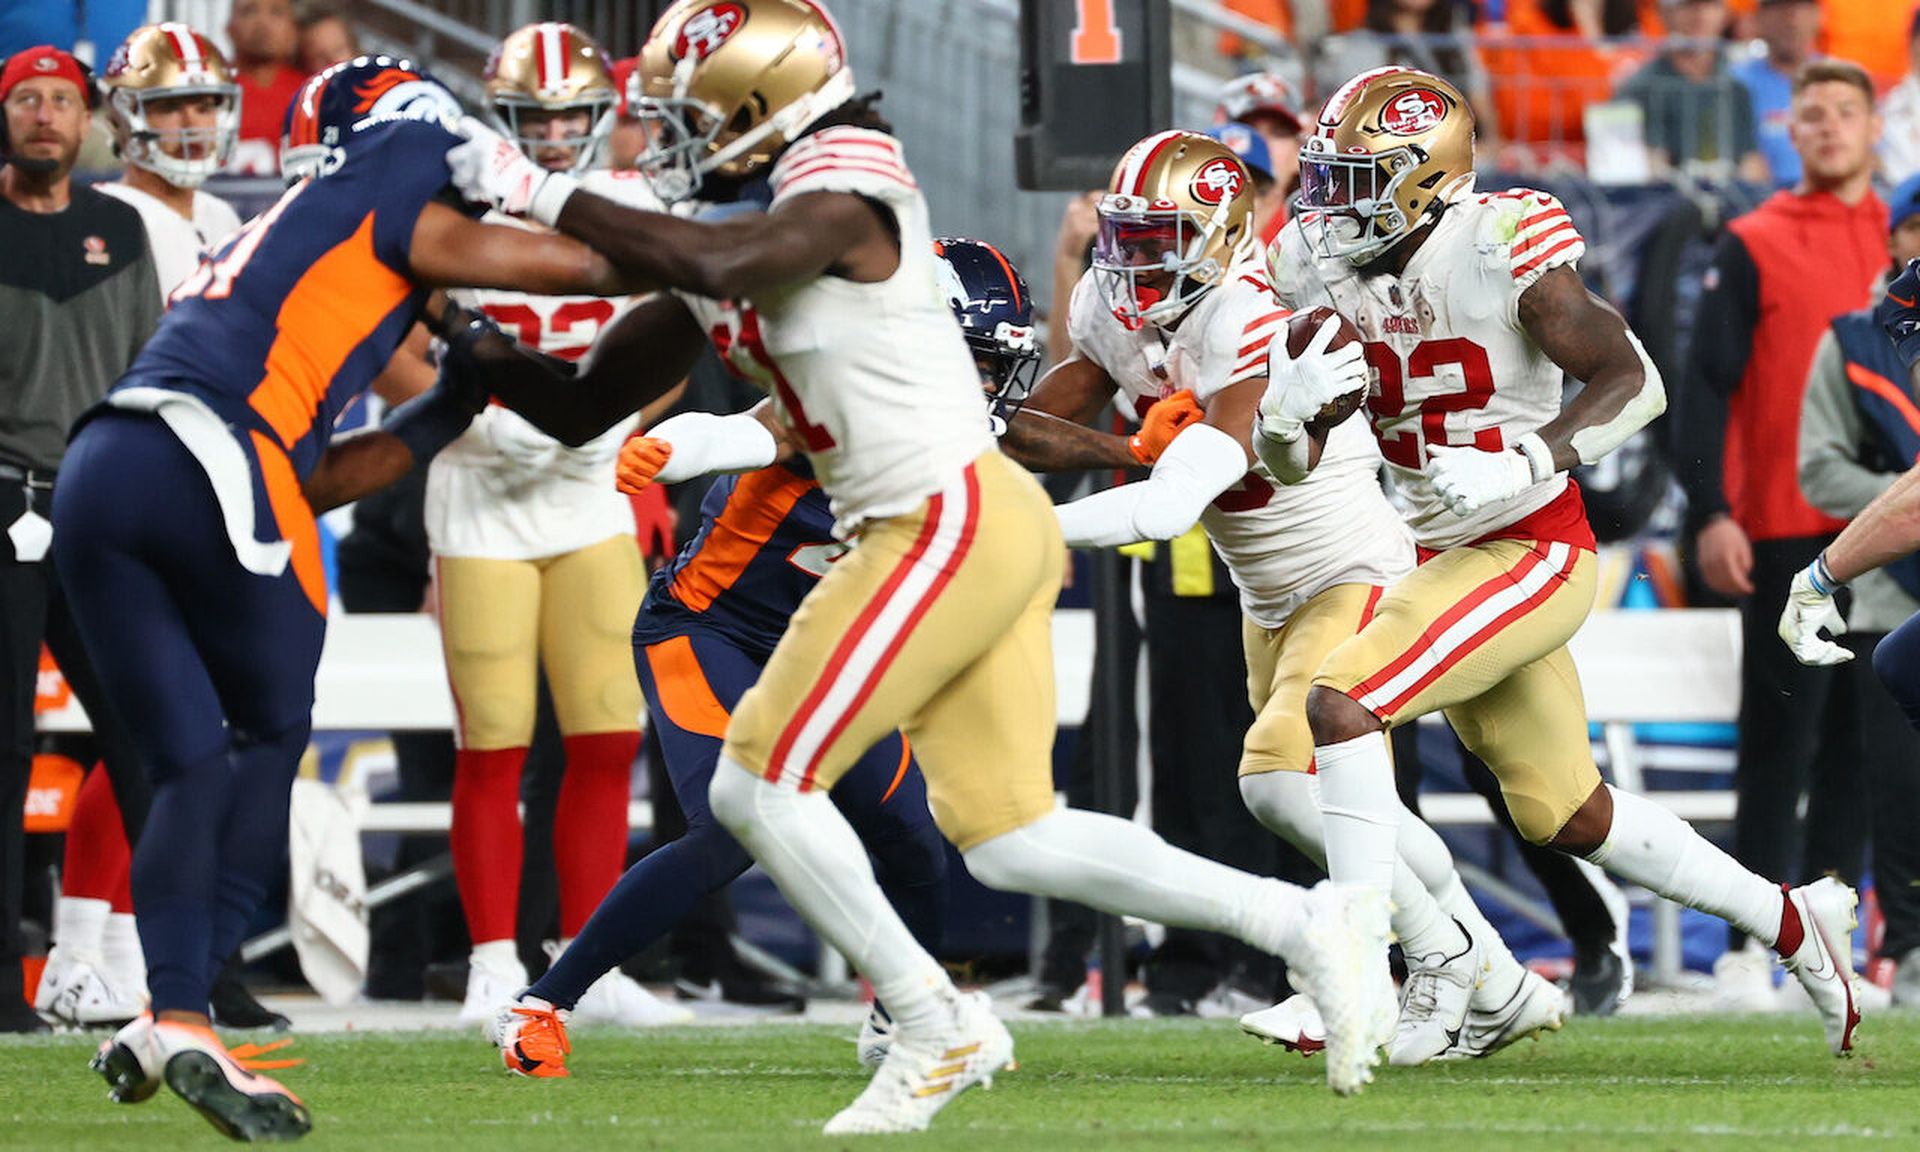 Jeff Wilson Jr., No. 22 of the San Francisco 49ers, rushes during the second half of the Sept. 25 game. NFL CISO Tomás Maldonado emphasized during a keynote session at InfoSec World the need for the whole security team to understand the &#8220;why&#8221; behind initiatives. (Photo by Jamie Schwaberow/Getty Images)